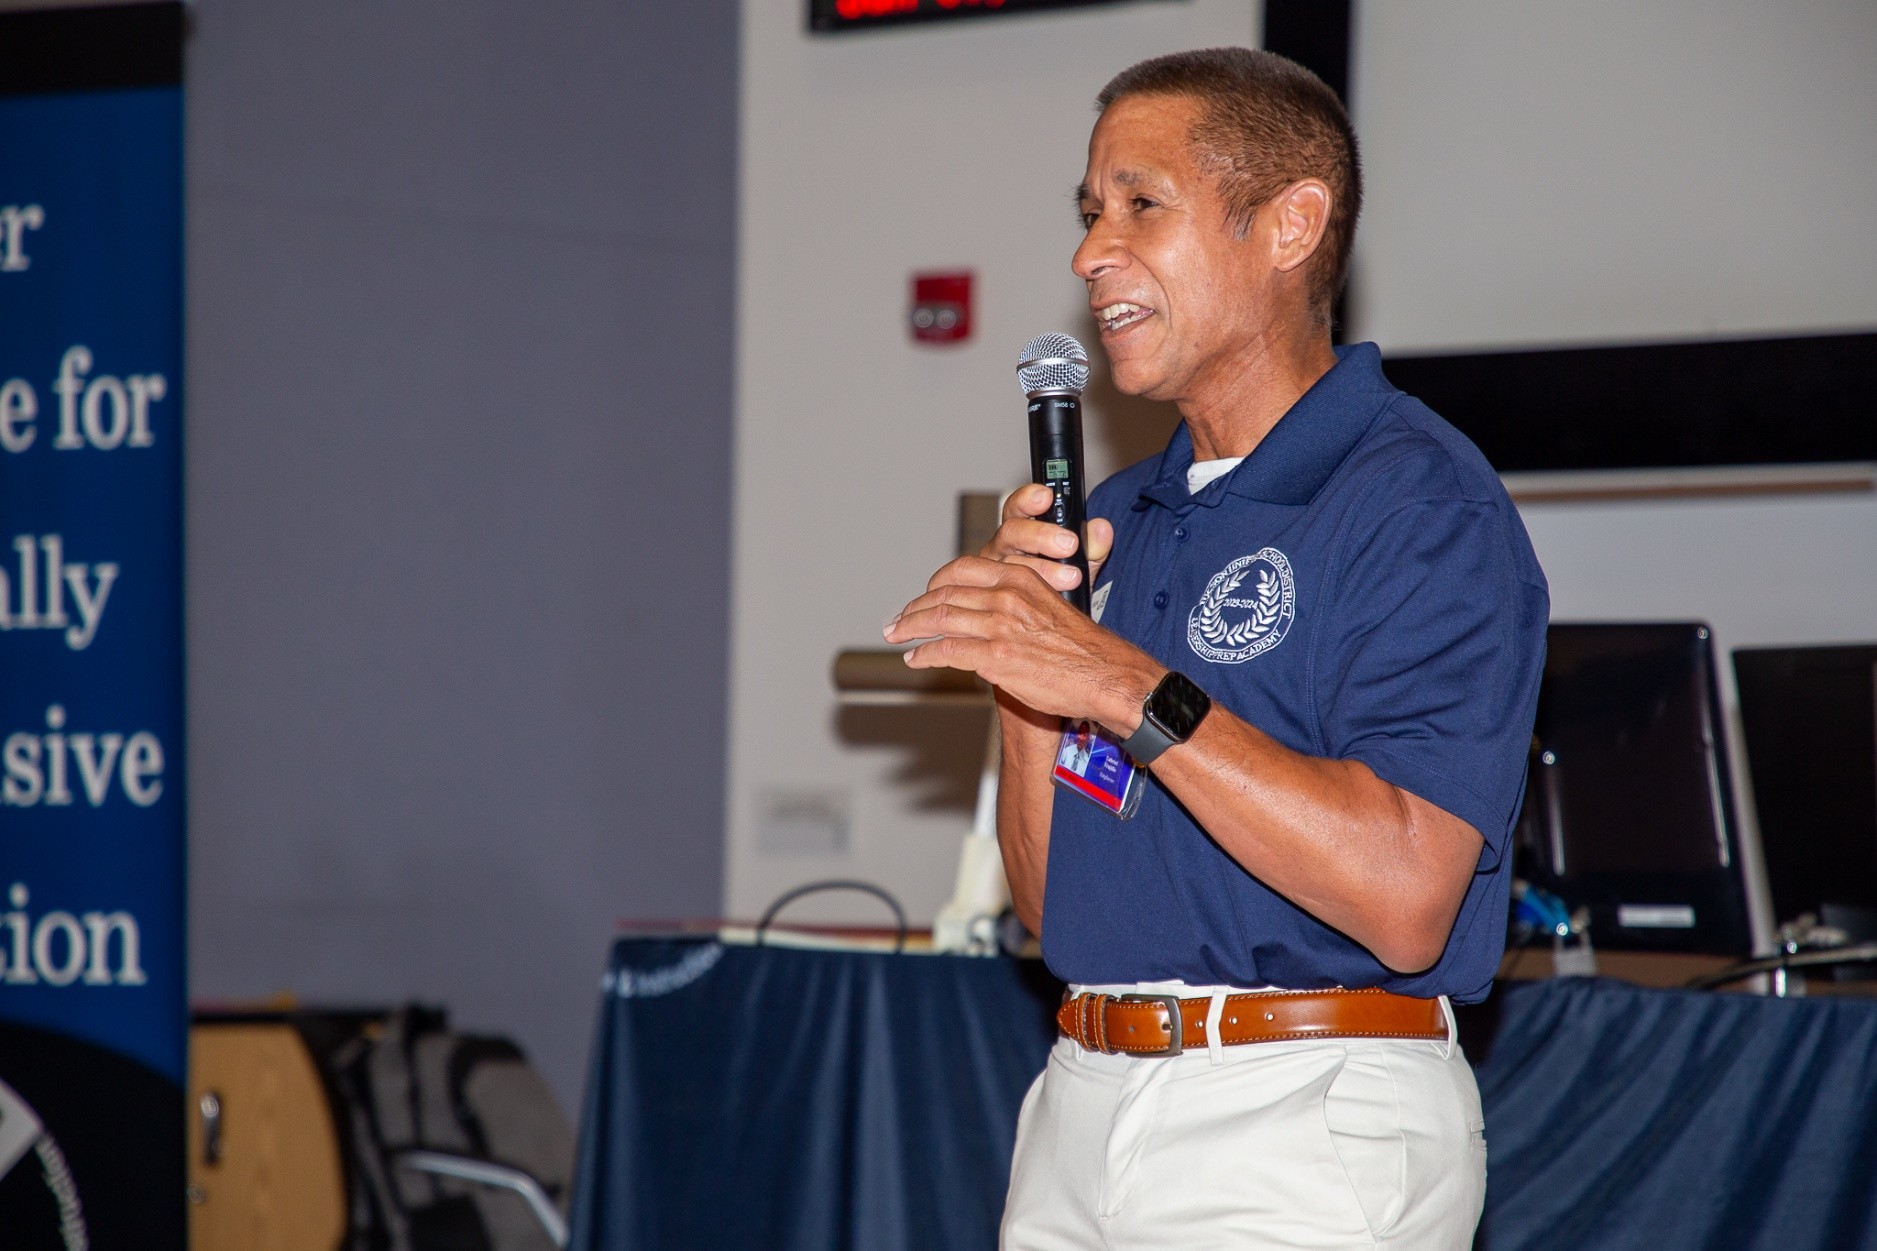 Dr. Trujillo delivers remarks at the Culturally Responsive Pedagogy and Instruction Department's conference on June 7.